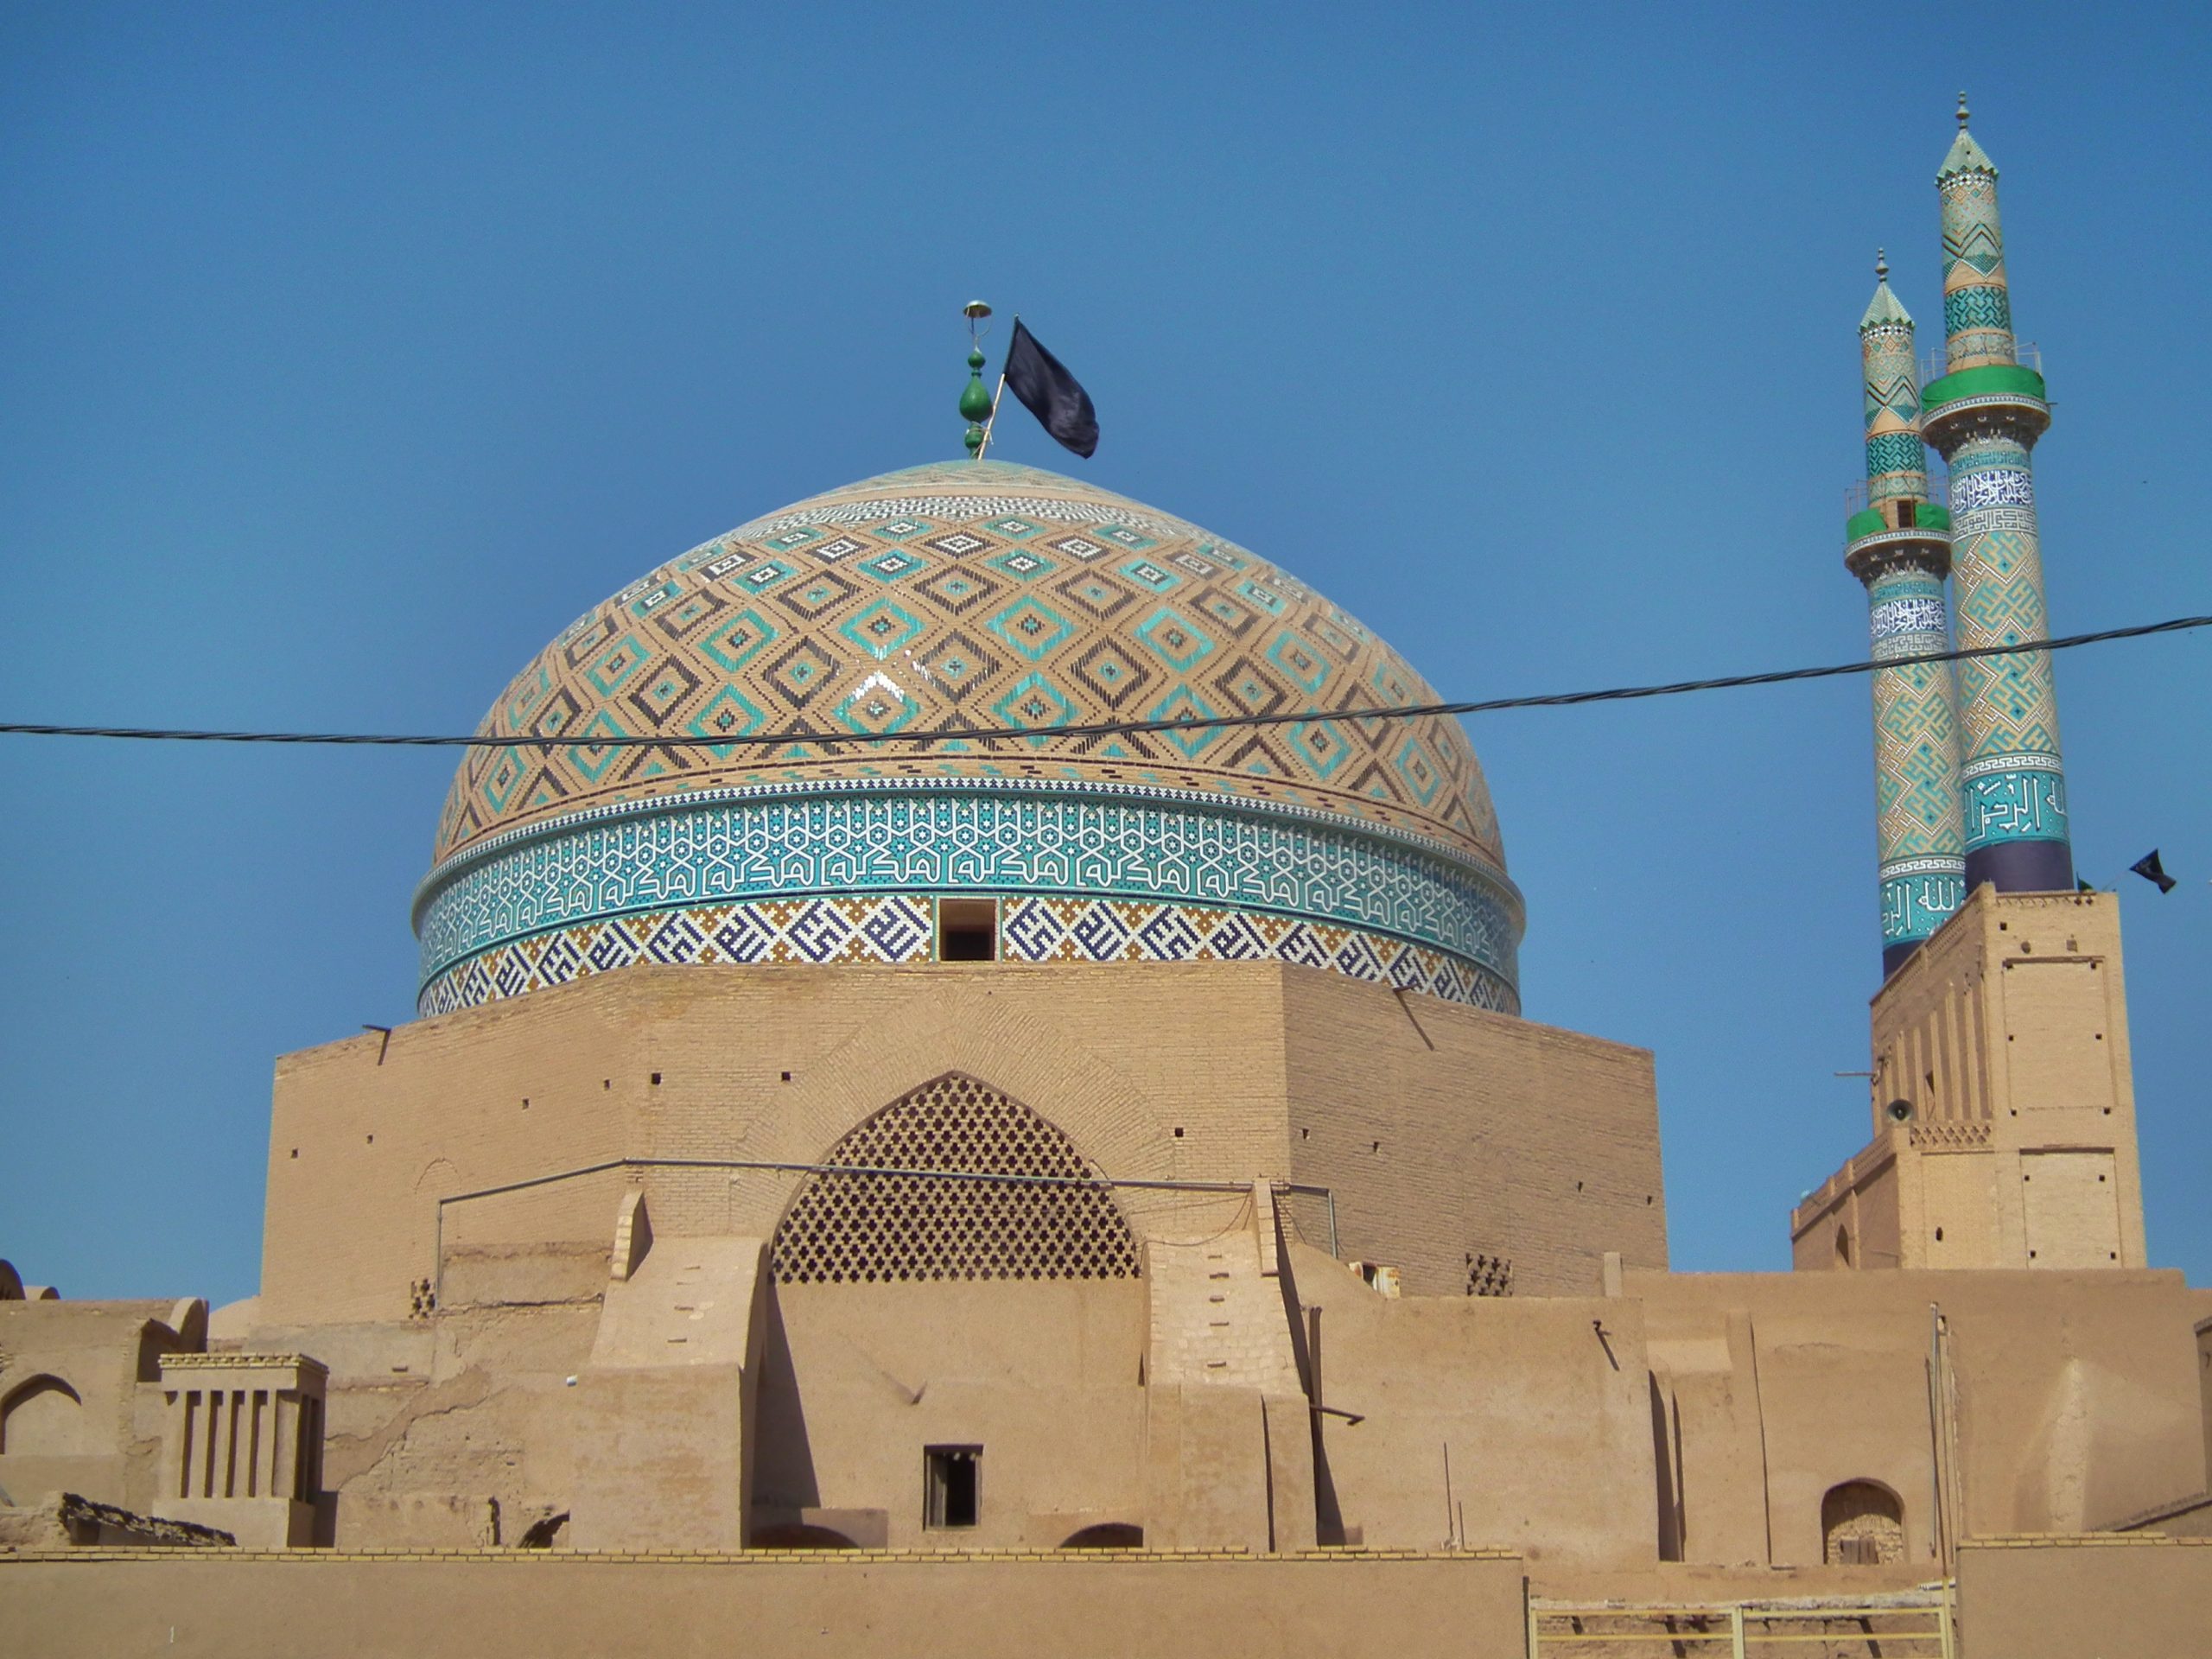 Jame Mosque: What are the 10 most famous Jame mosques in Iran?